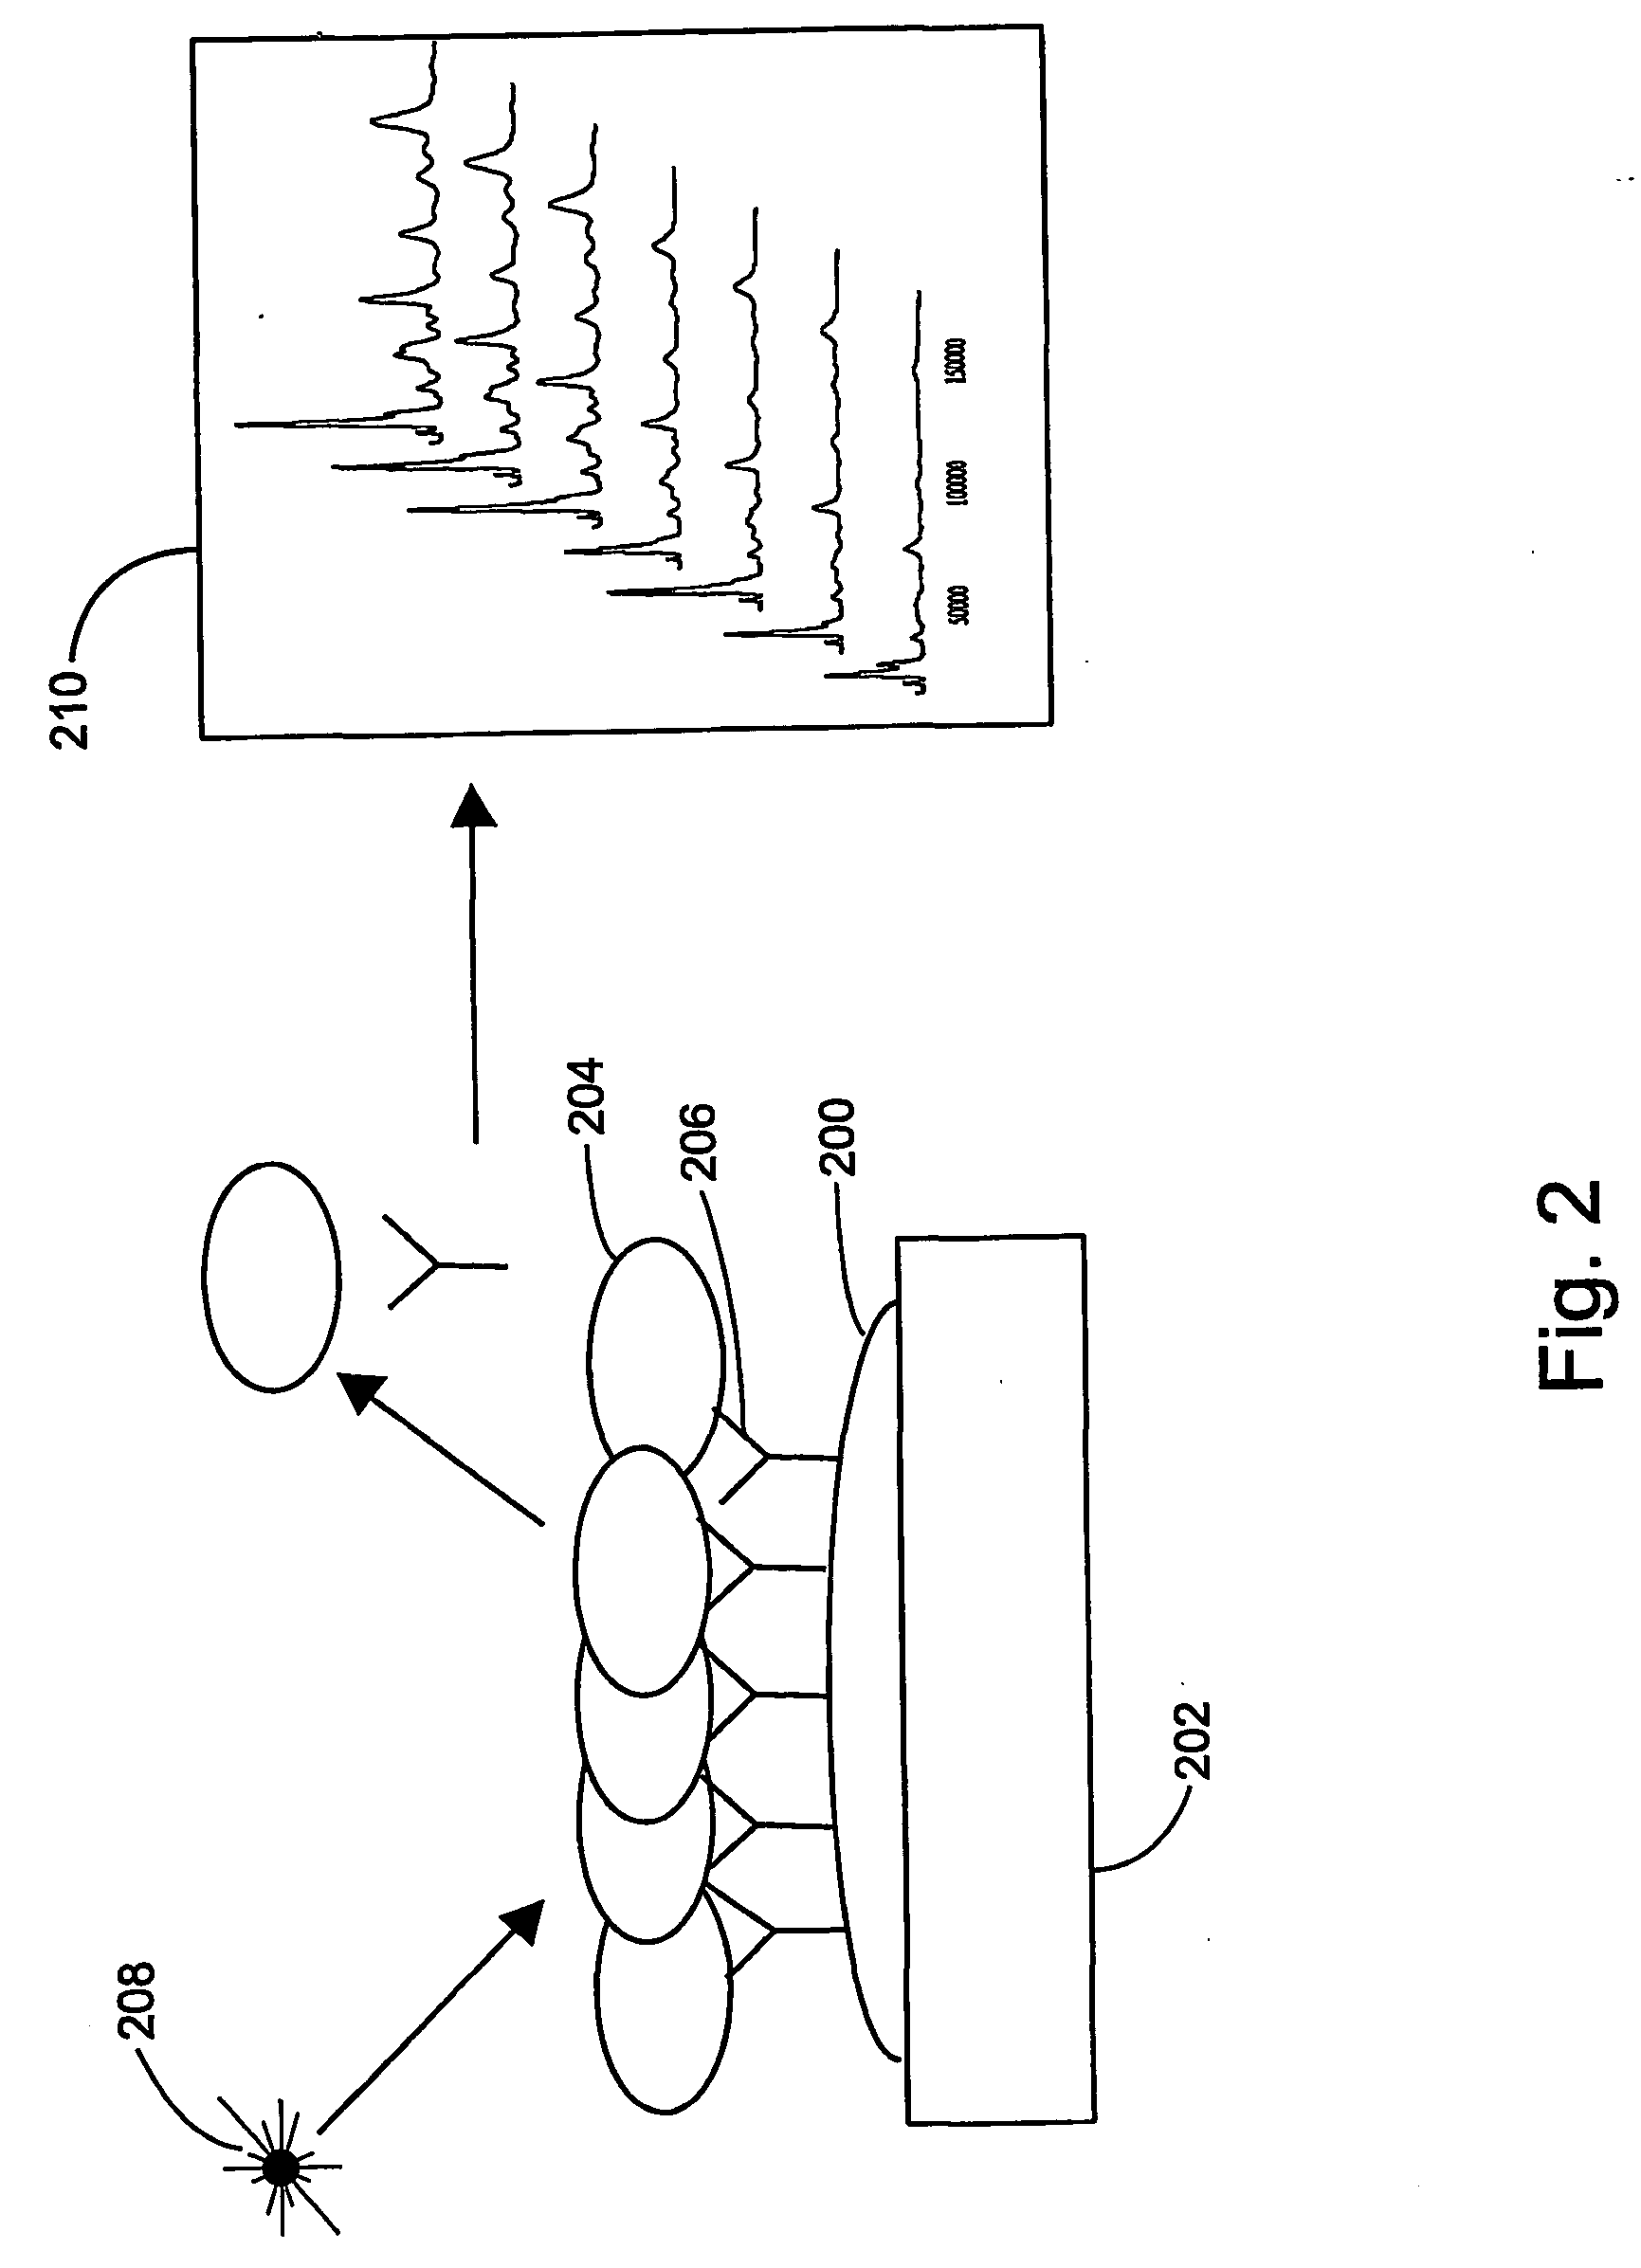 Methods and devices for quantitative detection of prostate specific membrane antigen and other prostatic markers